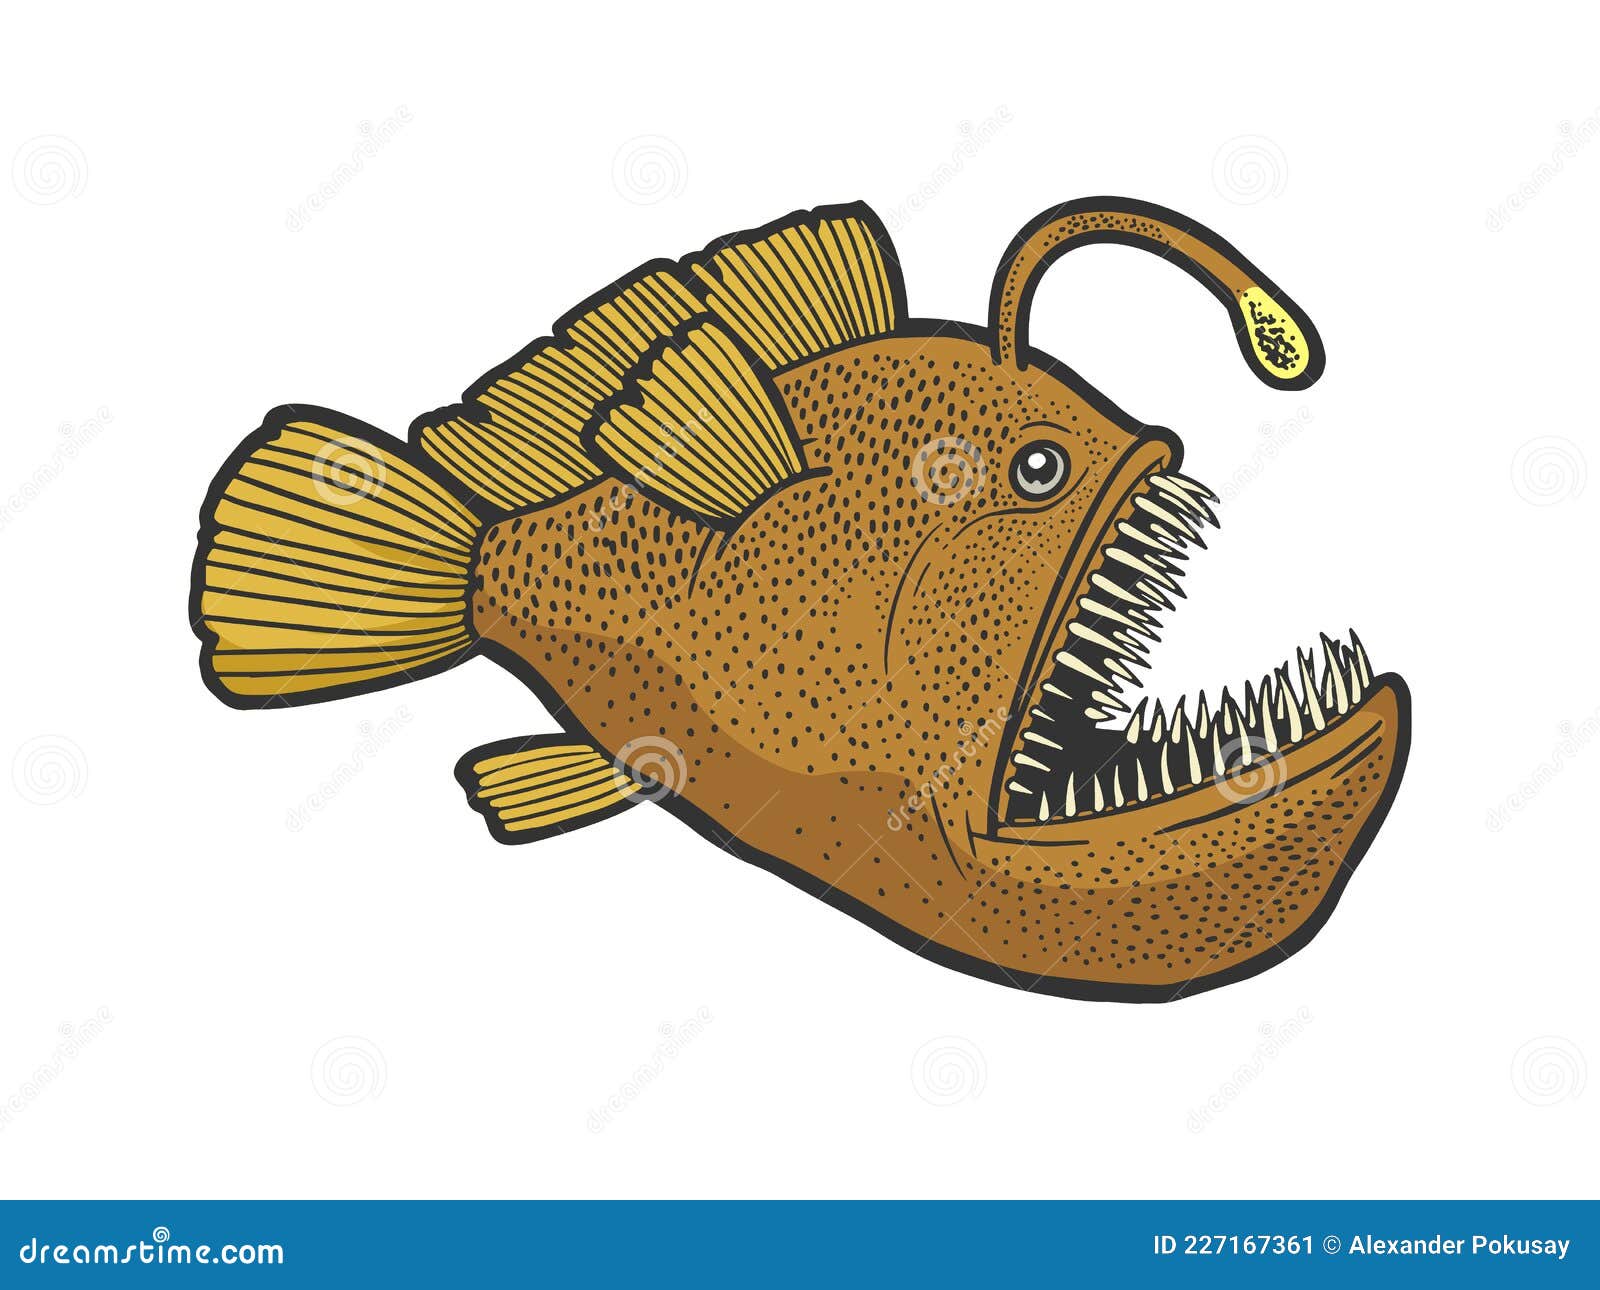 Angler Deep Sea Fish with Sketch Vector Stock Vector - Illustration of shape: 227167361